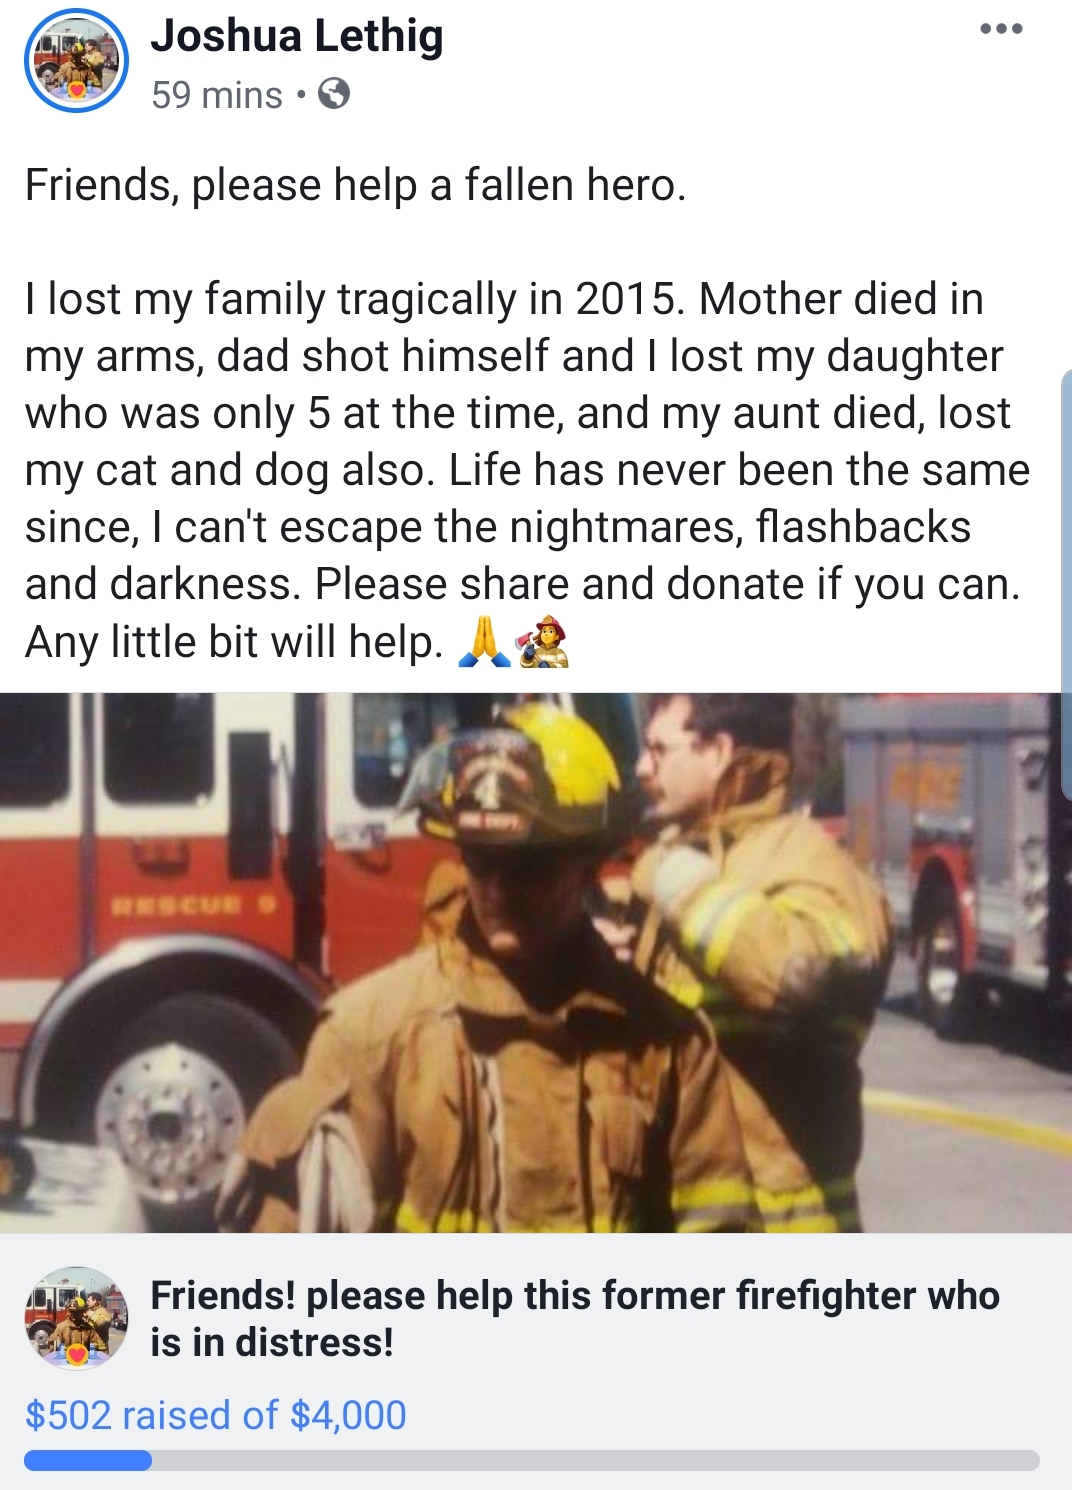 photo caption - Joshua Lethig 59 mins. Friends, please help a fallen hero. I lost my family tragically in 2015. Mother died in my arms, dad shot himself and I lost my daughter who was only 5 at the time, and my aunt died, lost my cat and dog also. Life ha